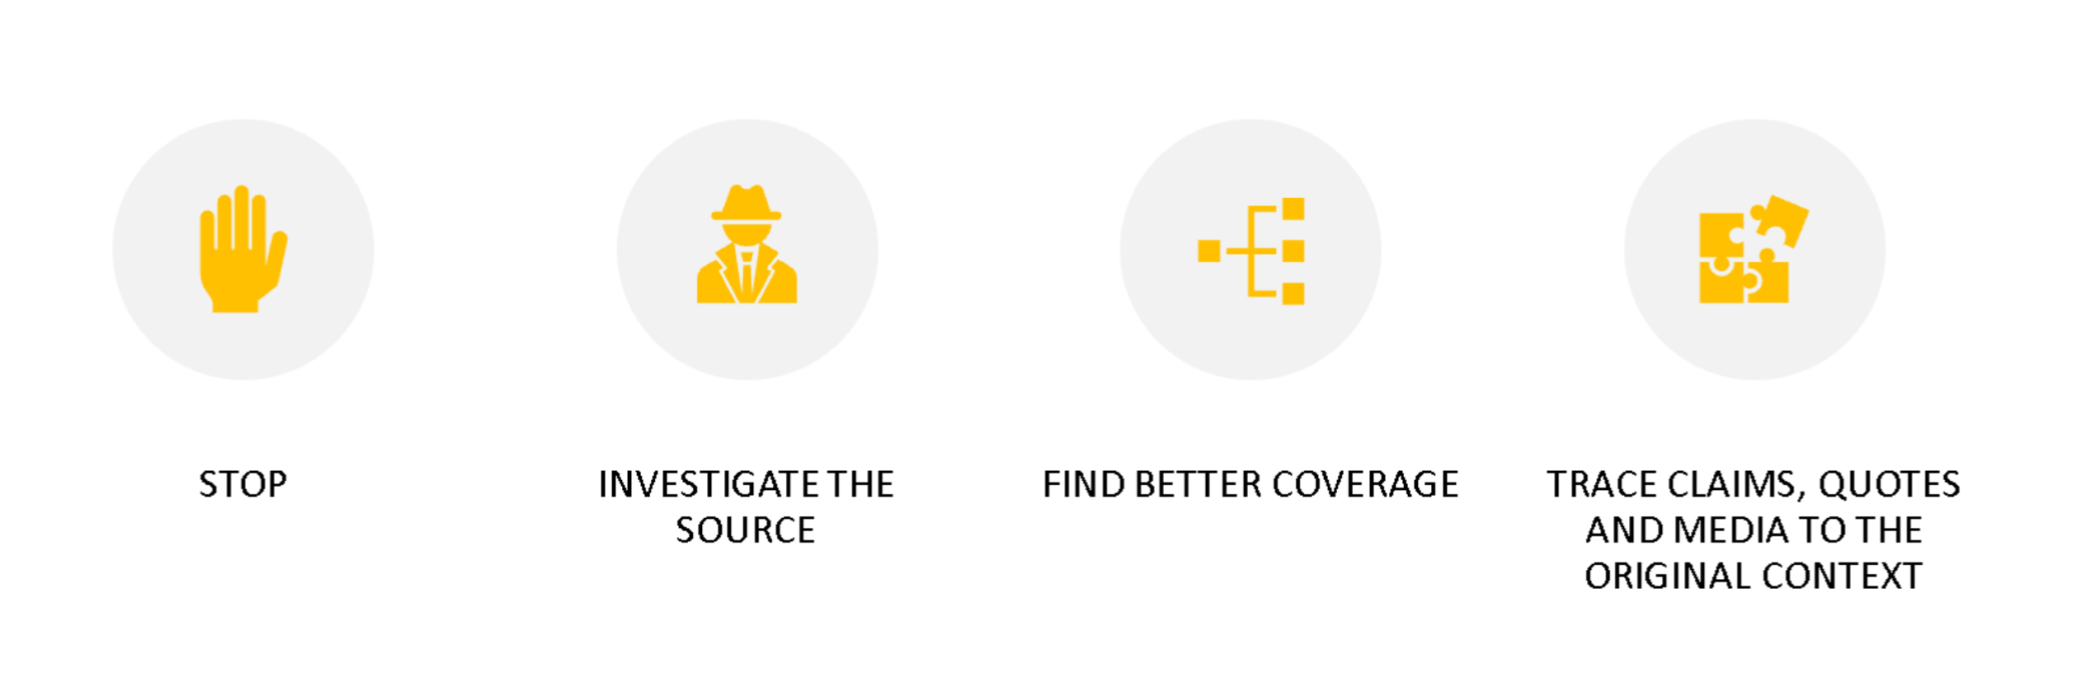 Stop; Investigate the Source; Find Better Coverage; Trace Claims, Quotes and Media to the Original Context